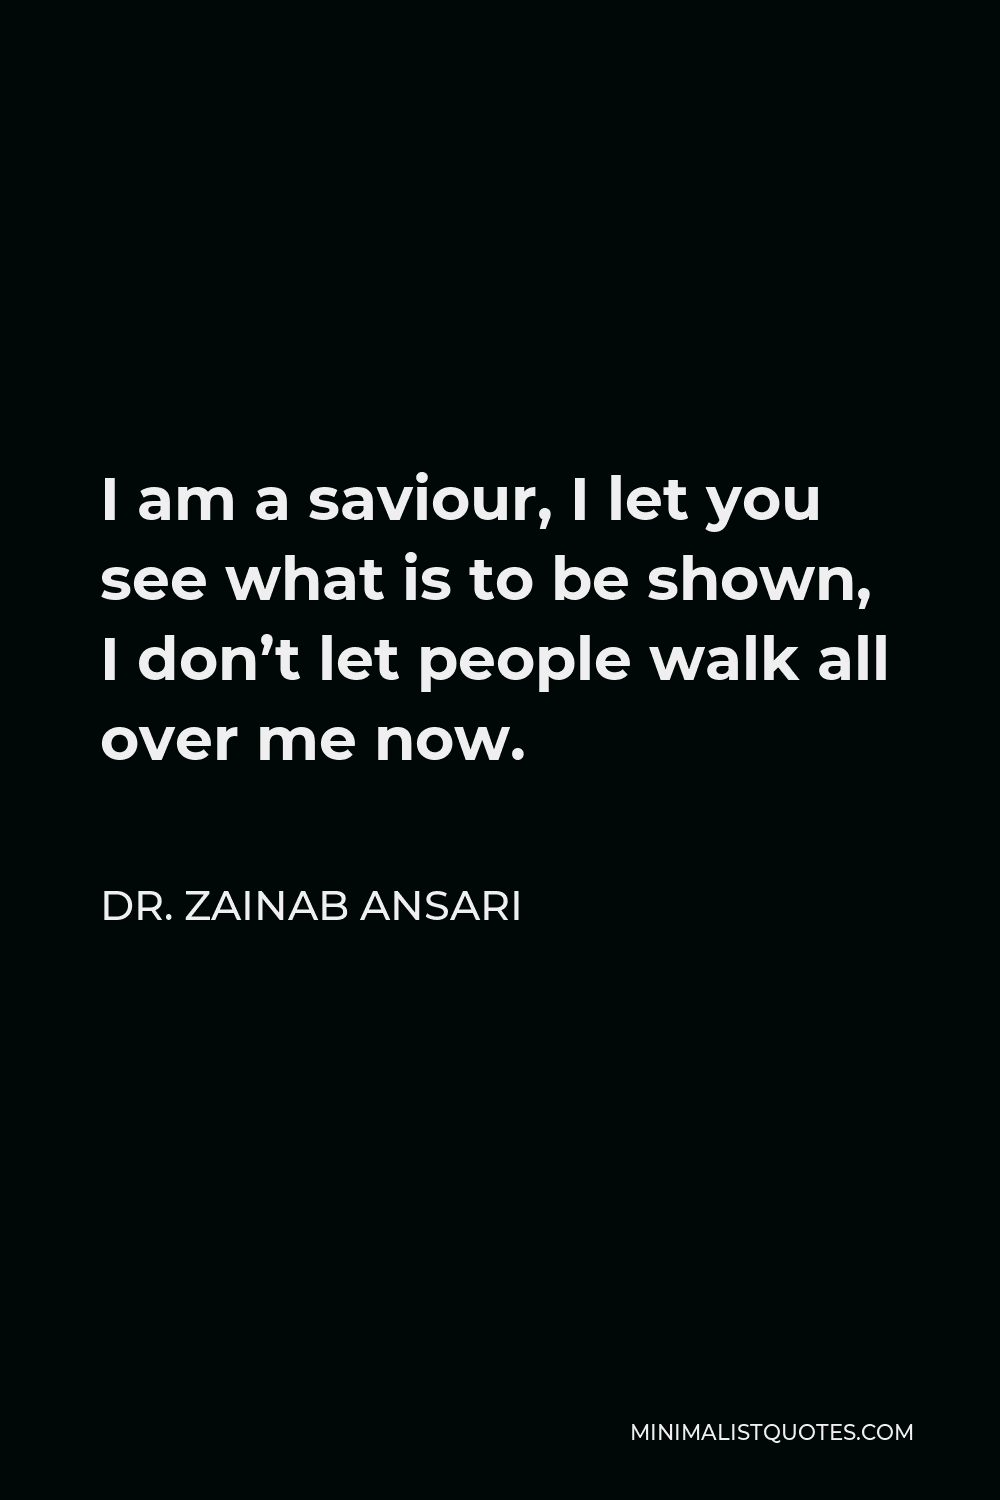 Dr. Zainab Ansari Quote - I am a saviour, I let you see what is to be shown, I don’t let people walk all over me now.